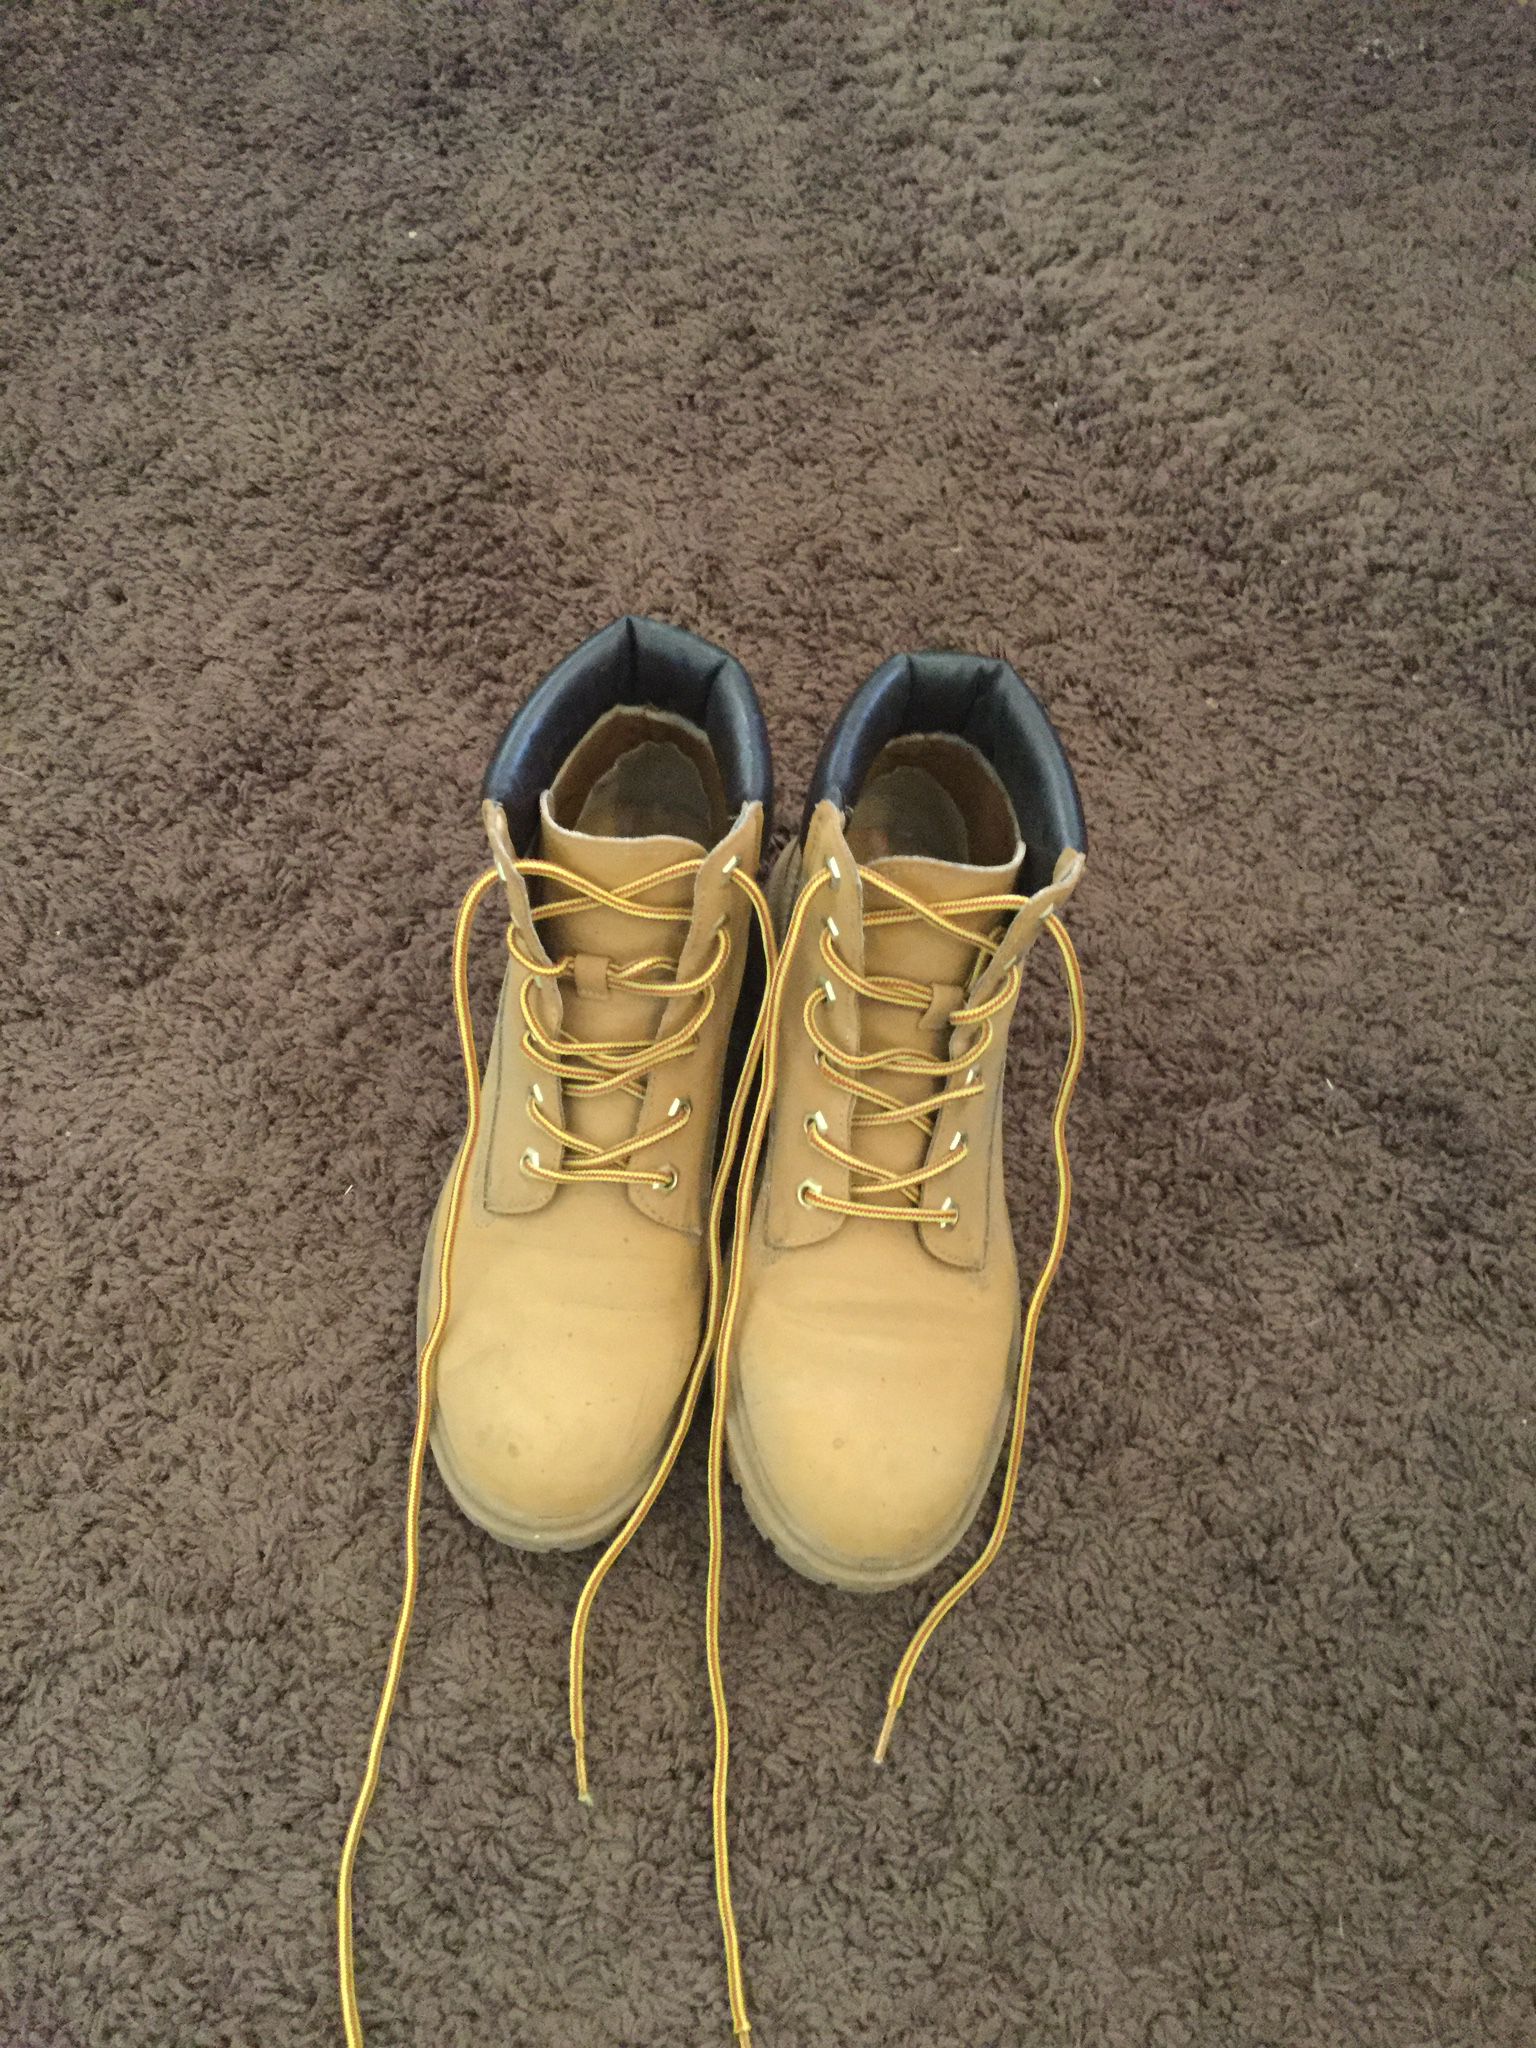 Women’s Boots - Size 8